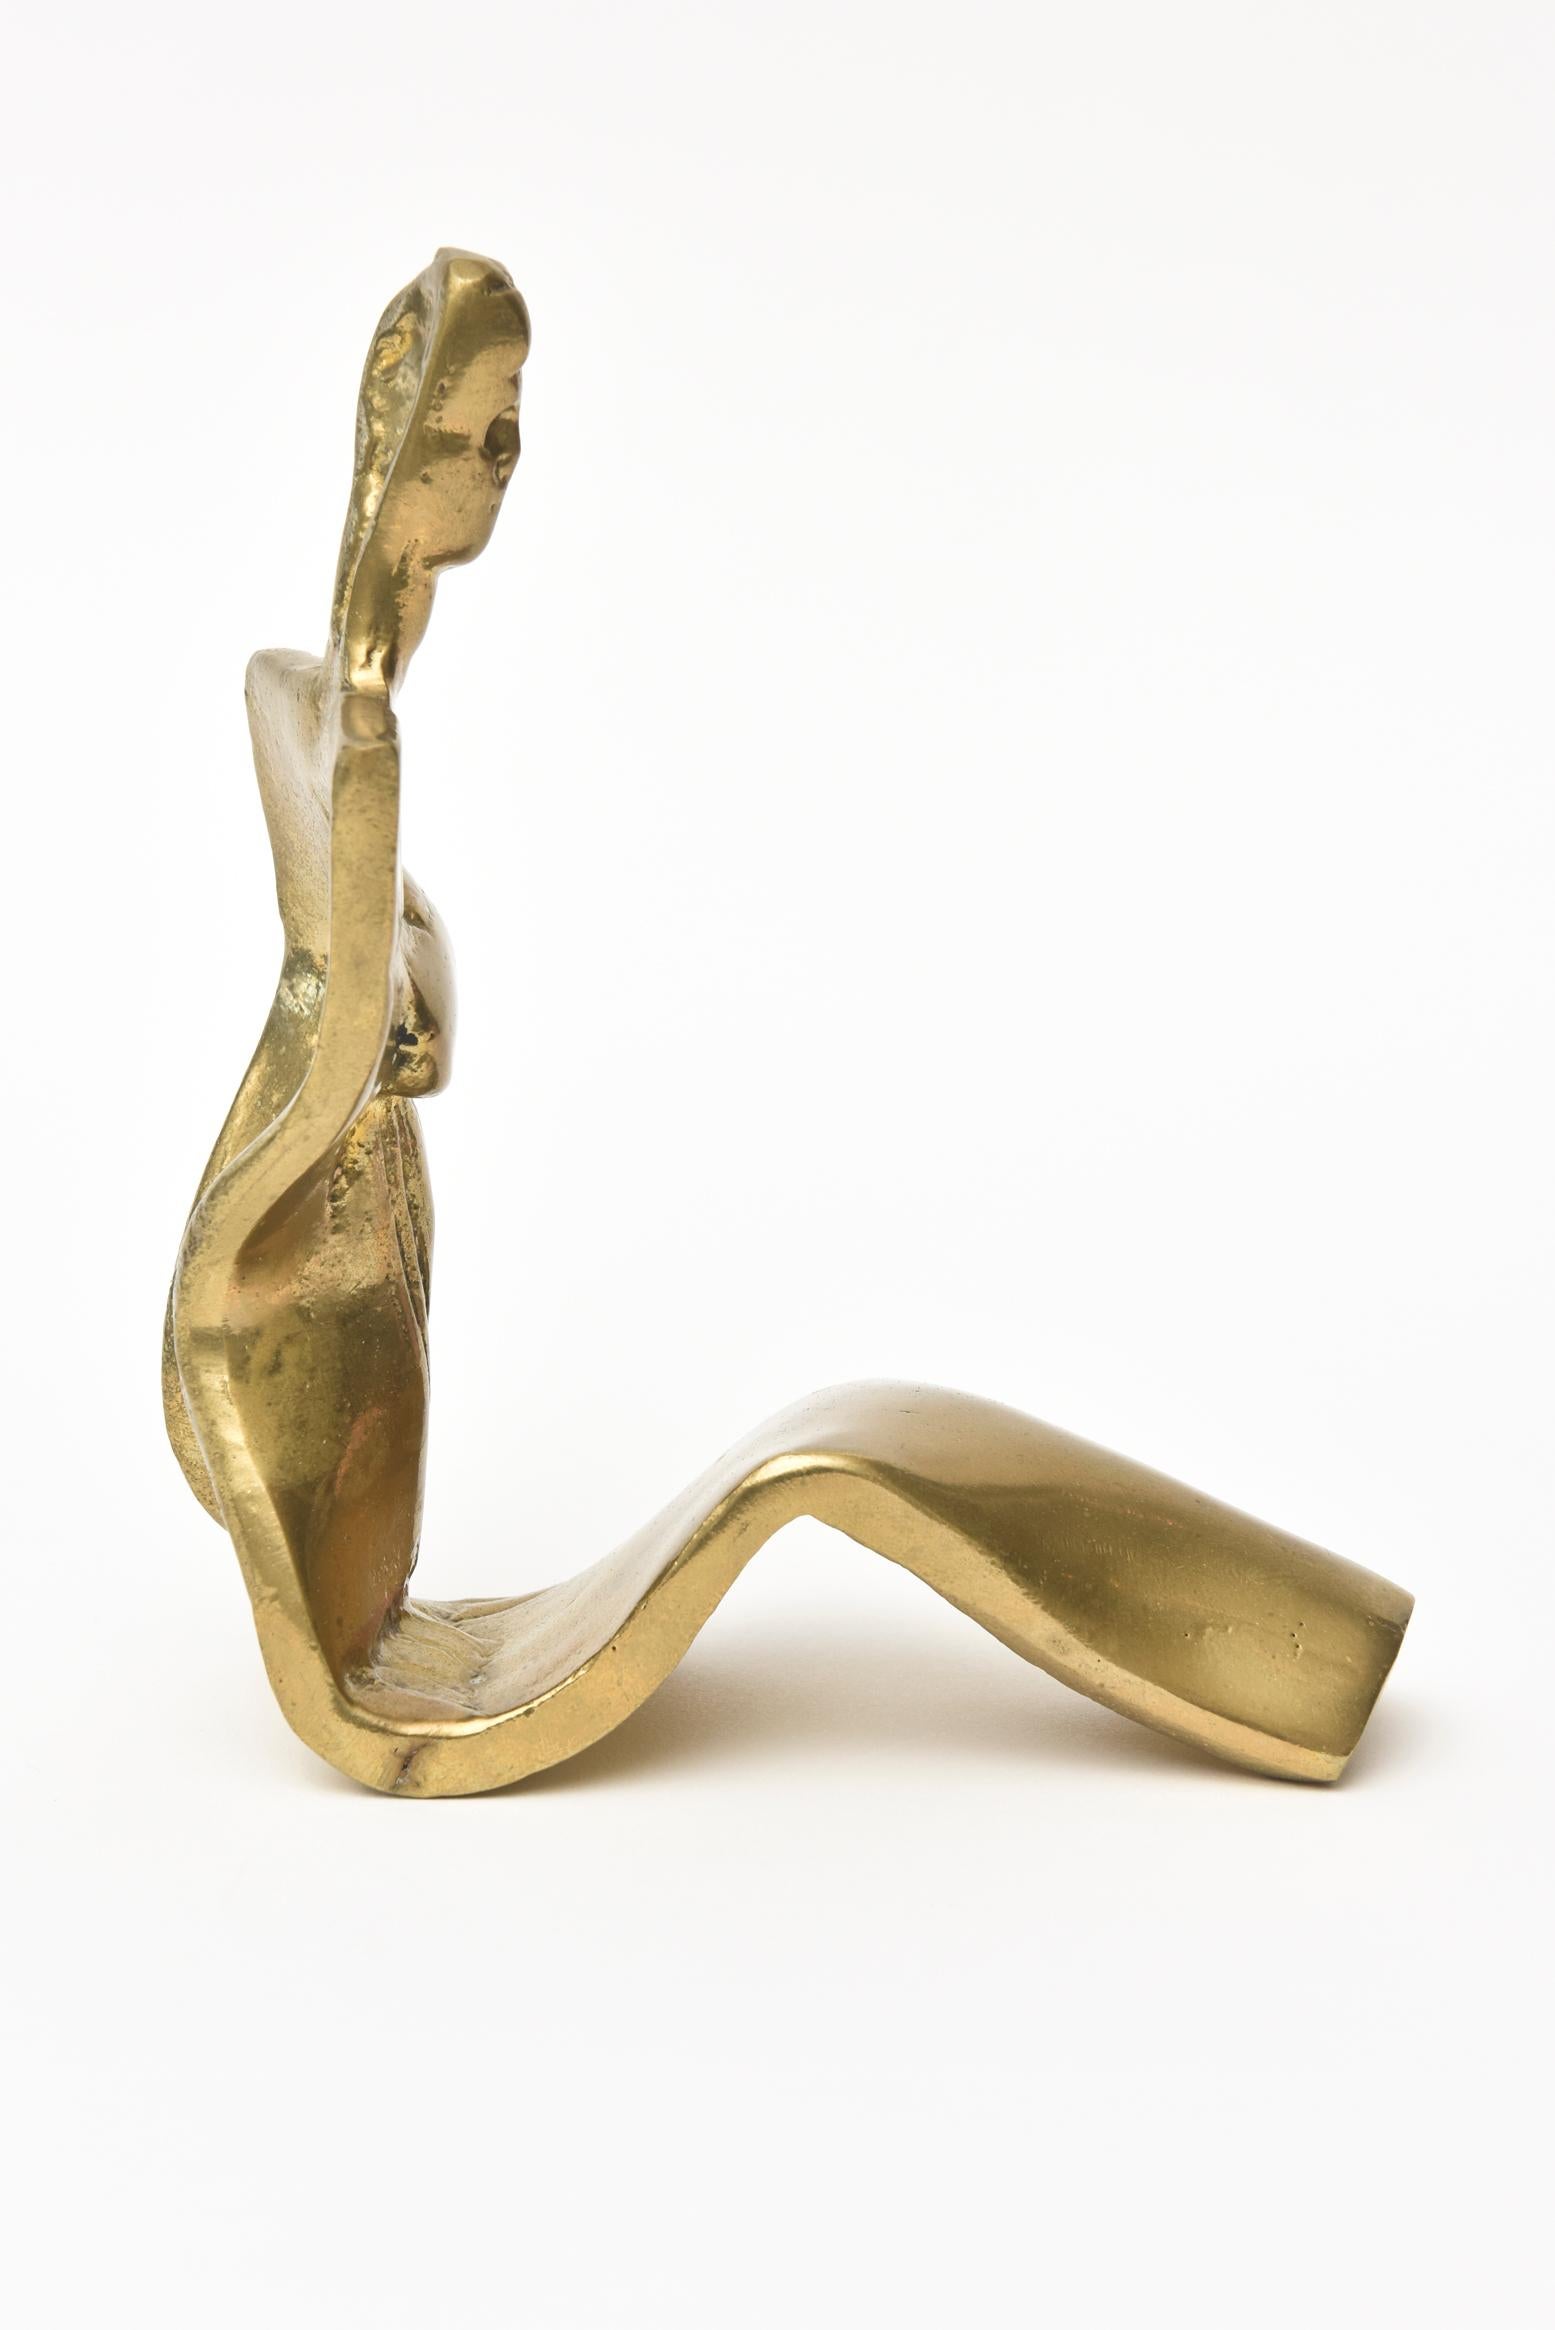 This lovely brass vintage limited edition brass abstract sculpture of a seated woman is signed but not legible and it is numbered 21 /100. It is great from all angles and makes a great desk or cocktail table accessory. It retains the original patina